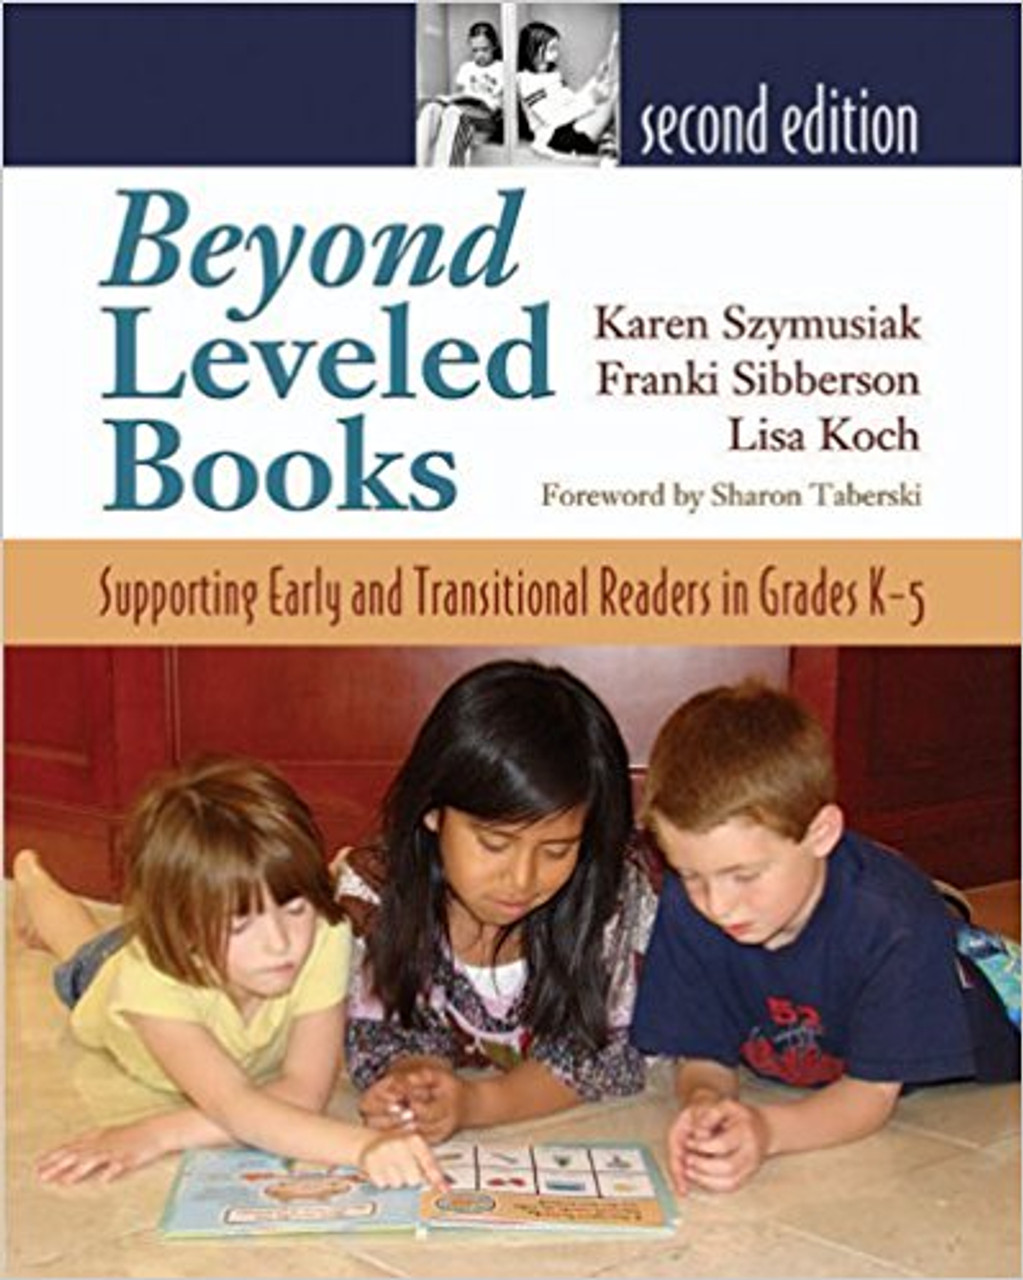 Beyond Leveled Books: Supporting Early and Transitional Readers in Grades K-5 by Franki Sibberson